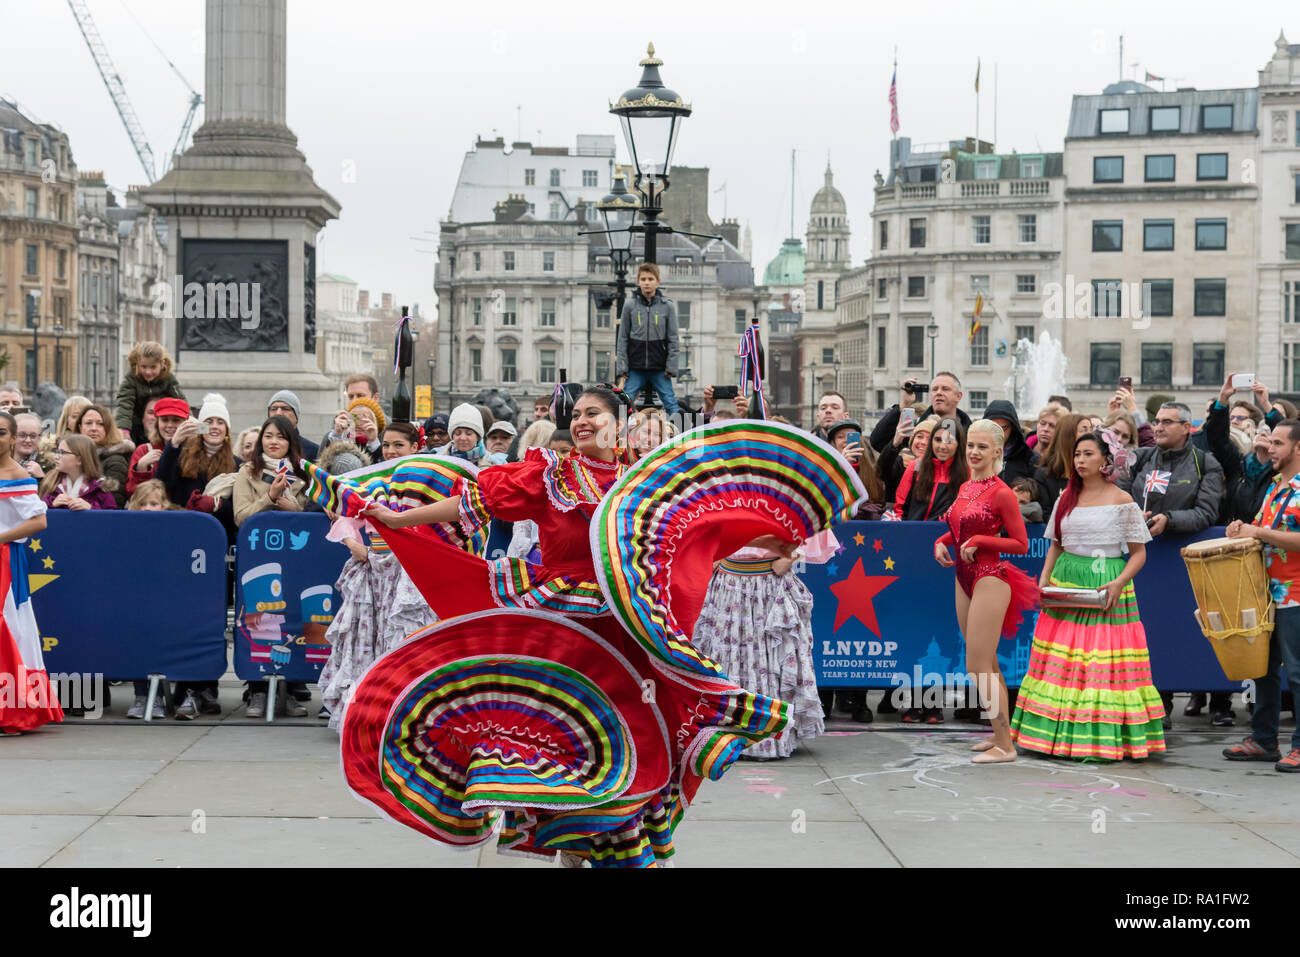 London, UK.  30 December 2018  Some of London New Year Day Parade’s best performers kick-starting festivities in front of the World famous National Gallery, Trafalgar Square, London, UK. Acts include Carnaval del Pueblo, which is a celebration of Latin American culture. It aims to increase awareness and understanding of the vibrant cultural heritage of the 19 Latin American countries.  Credit: Ilyas Ayub / Alamy Live News Stock Photo